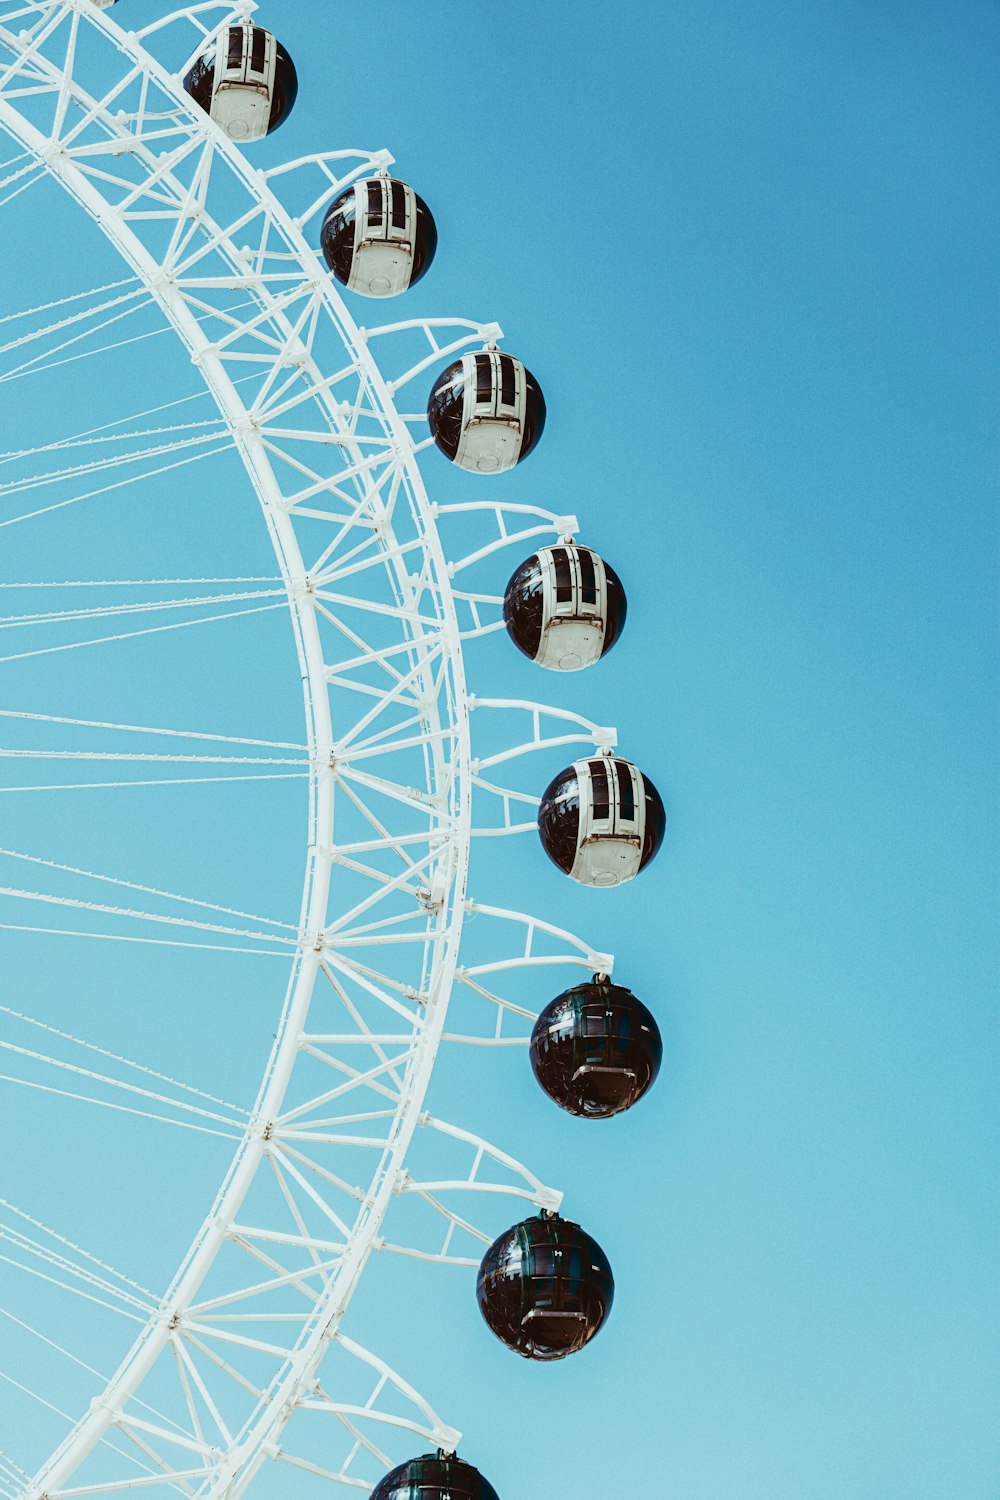 a large white ferris wheel sitting next to a blue sky